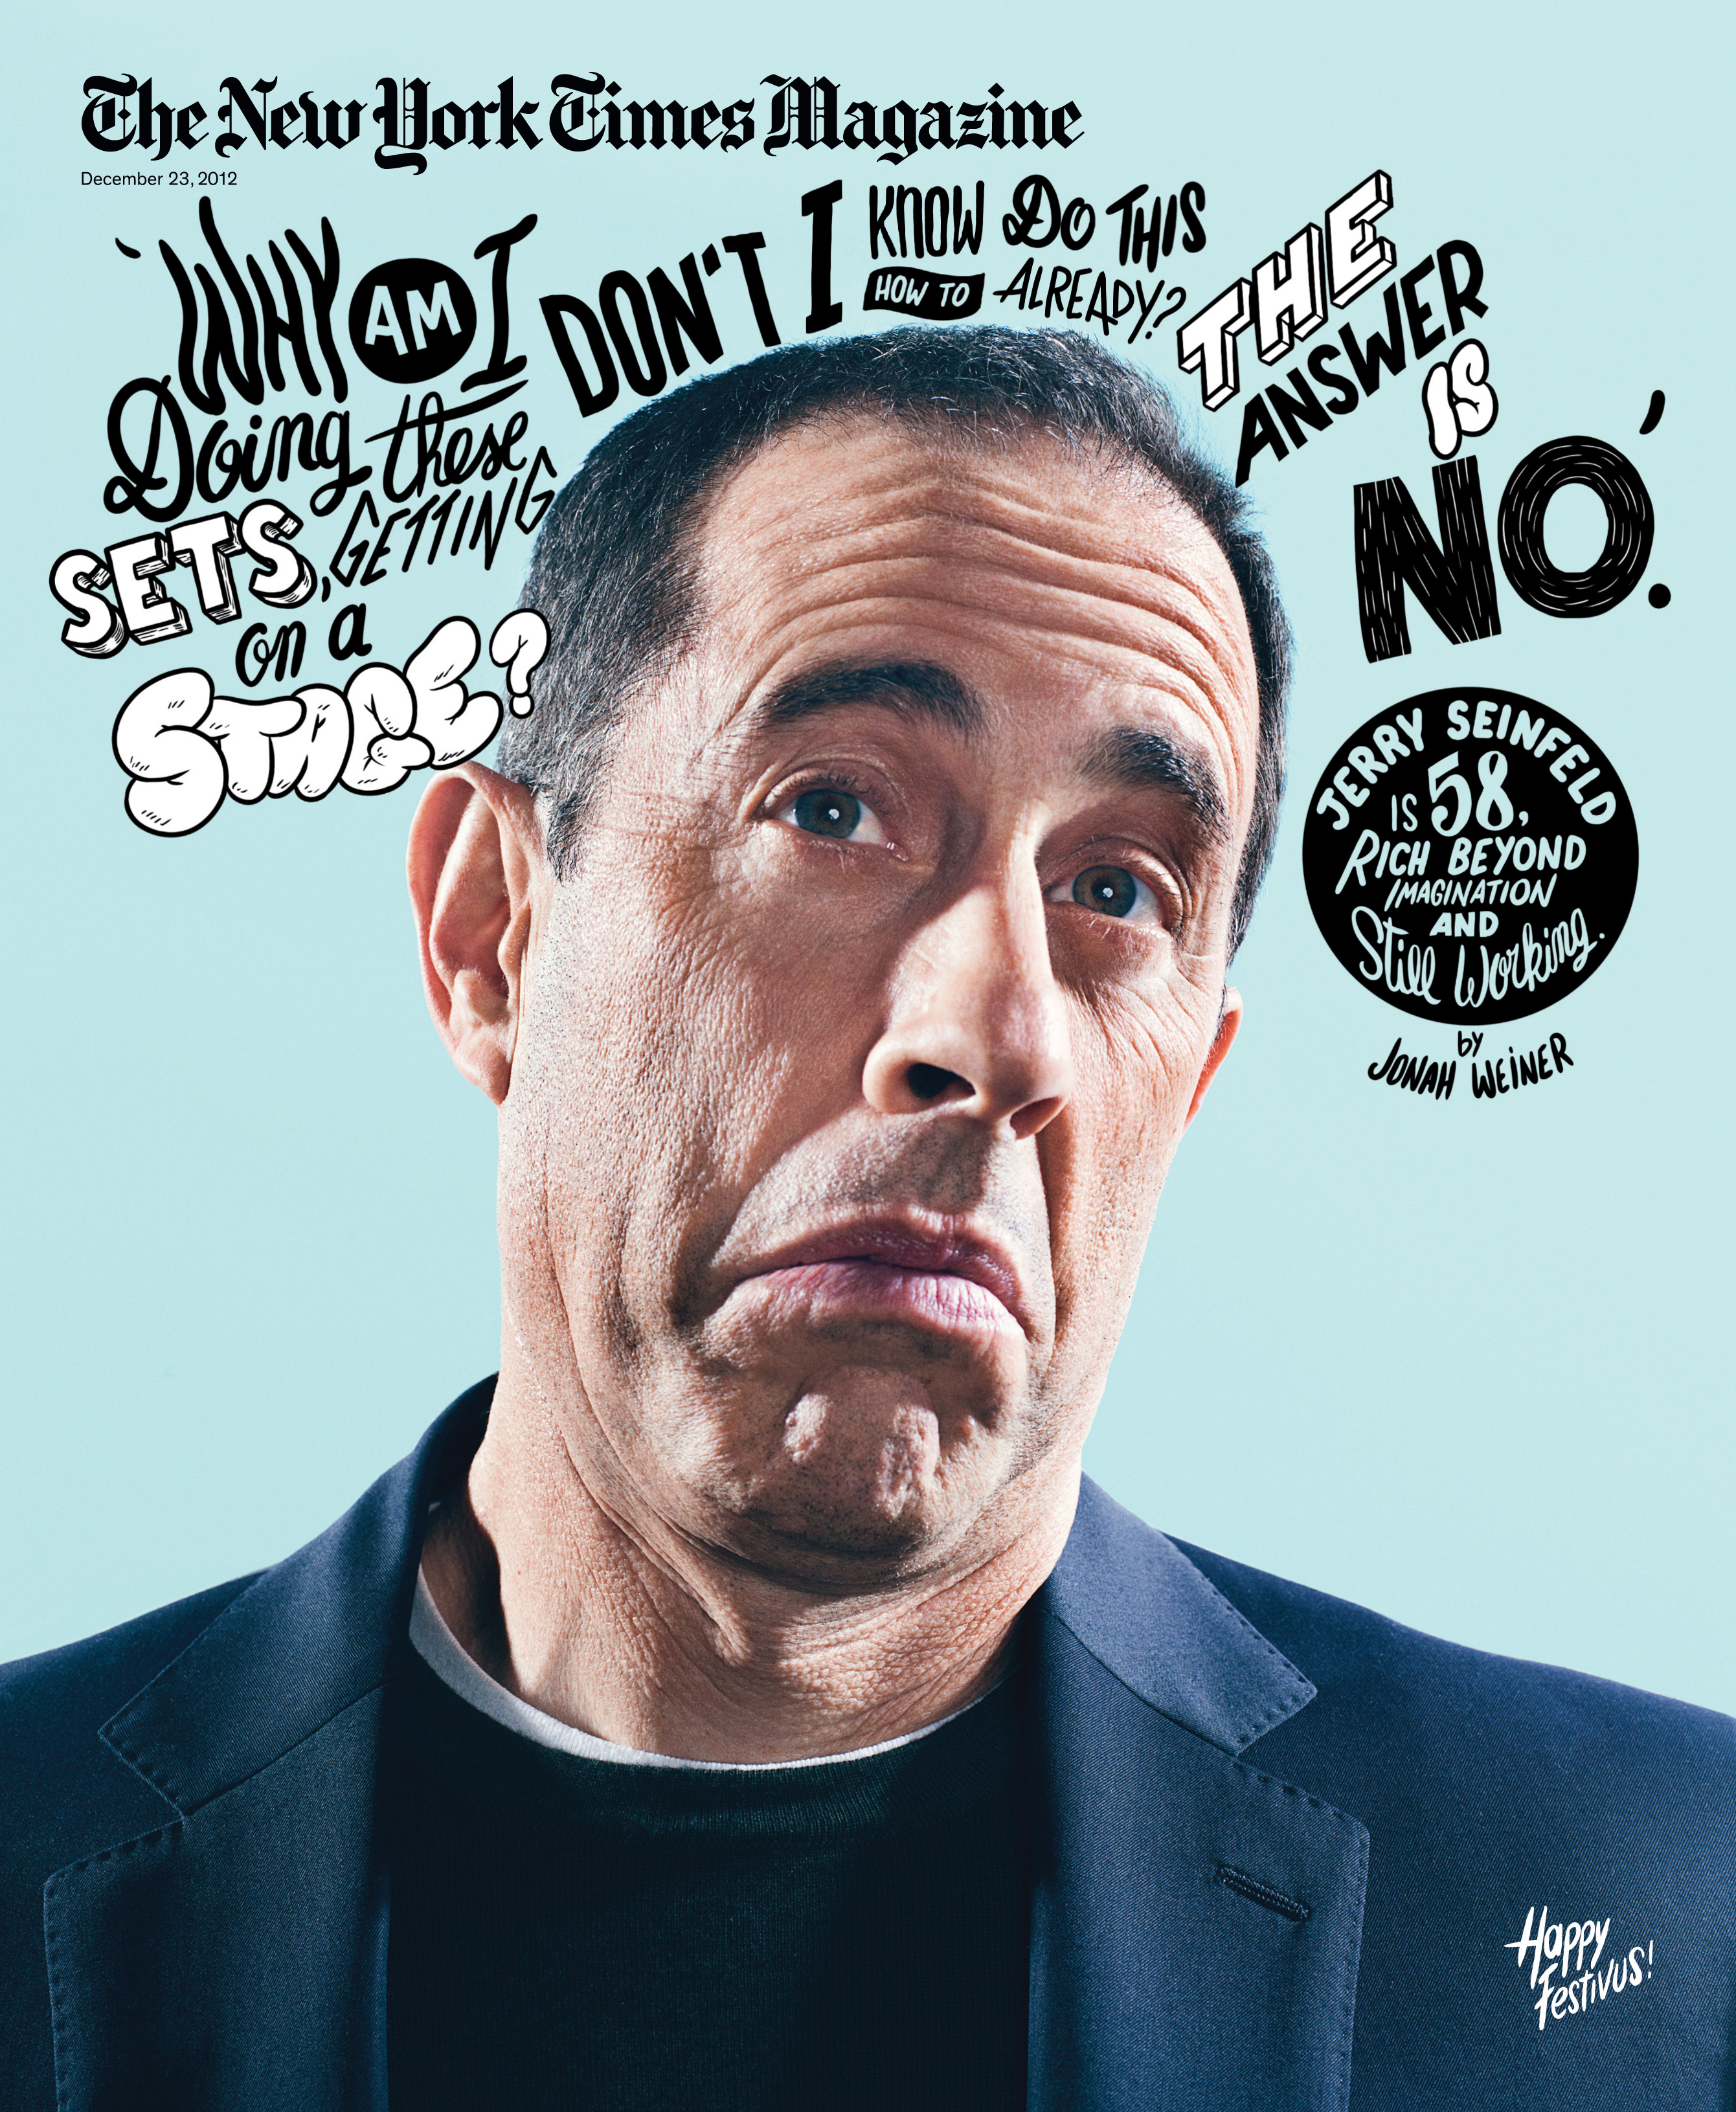 The New York Times Magazine-December 23, 2012: "Jerry Seinfeld Is 58, Rich Beyond Imagination and Still Working"